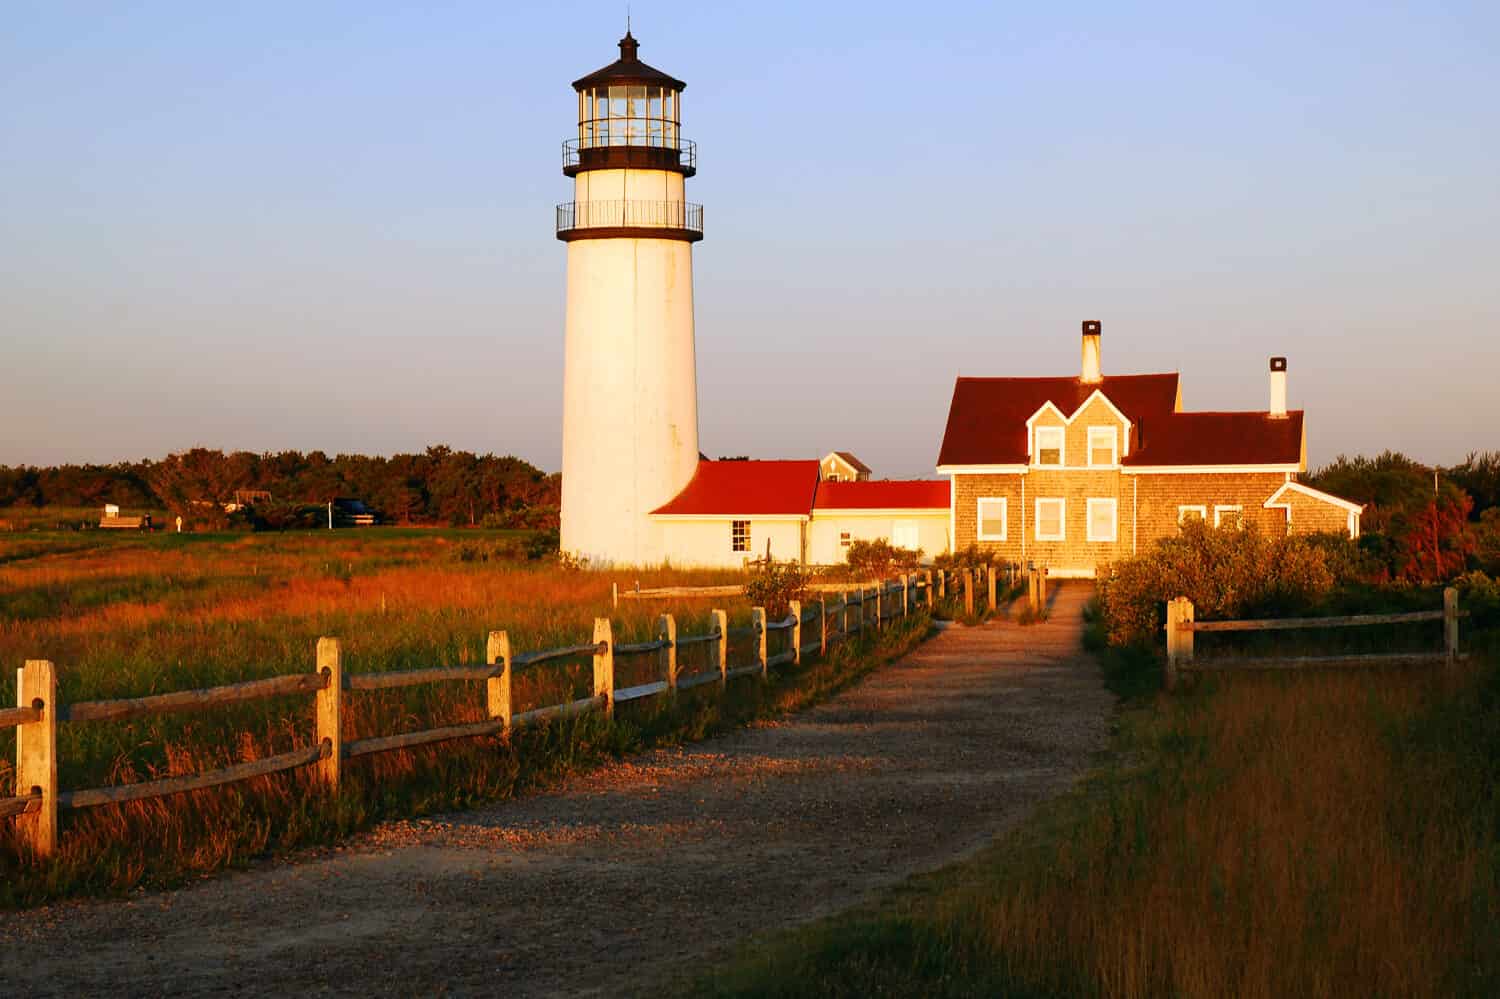 The Highland Light, also known as the Cape Cod Light, is the oldest and tallest lighthouse on Cape Cod.  It was the subject of artist Edward Hopper's Highland Light, North Truro painting.